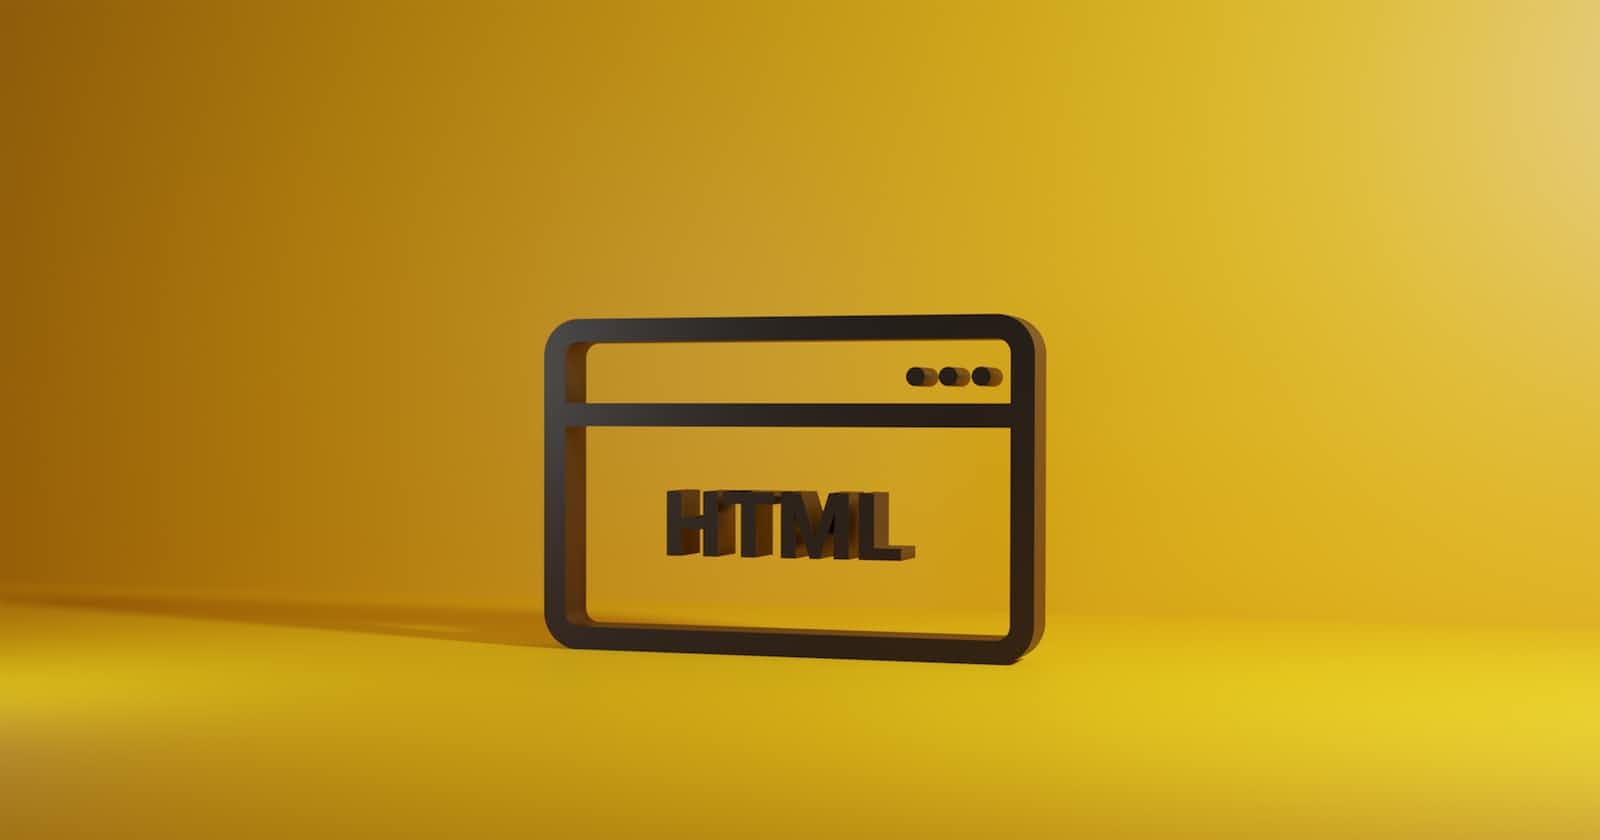 Getting Started with HTML: A Beginner's Guide to Building Web Pages